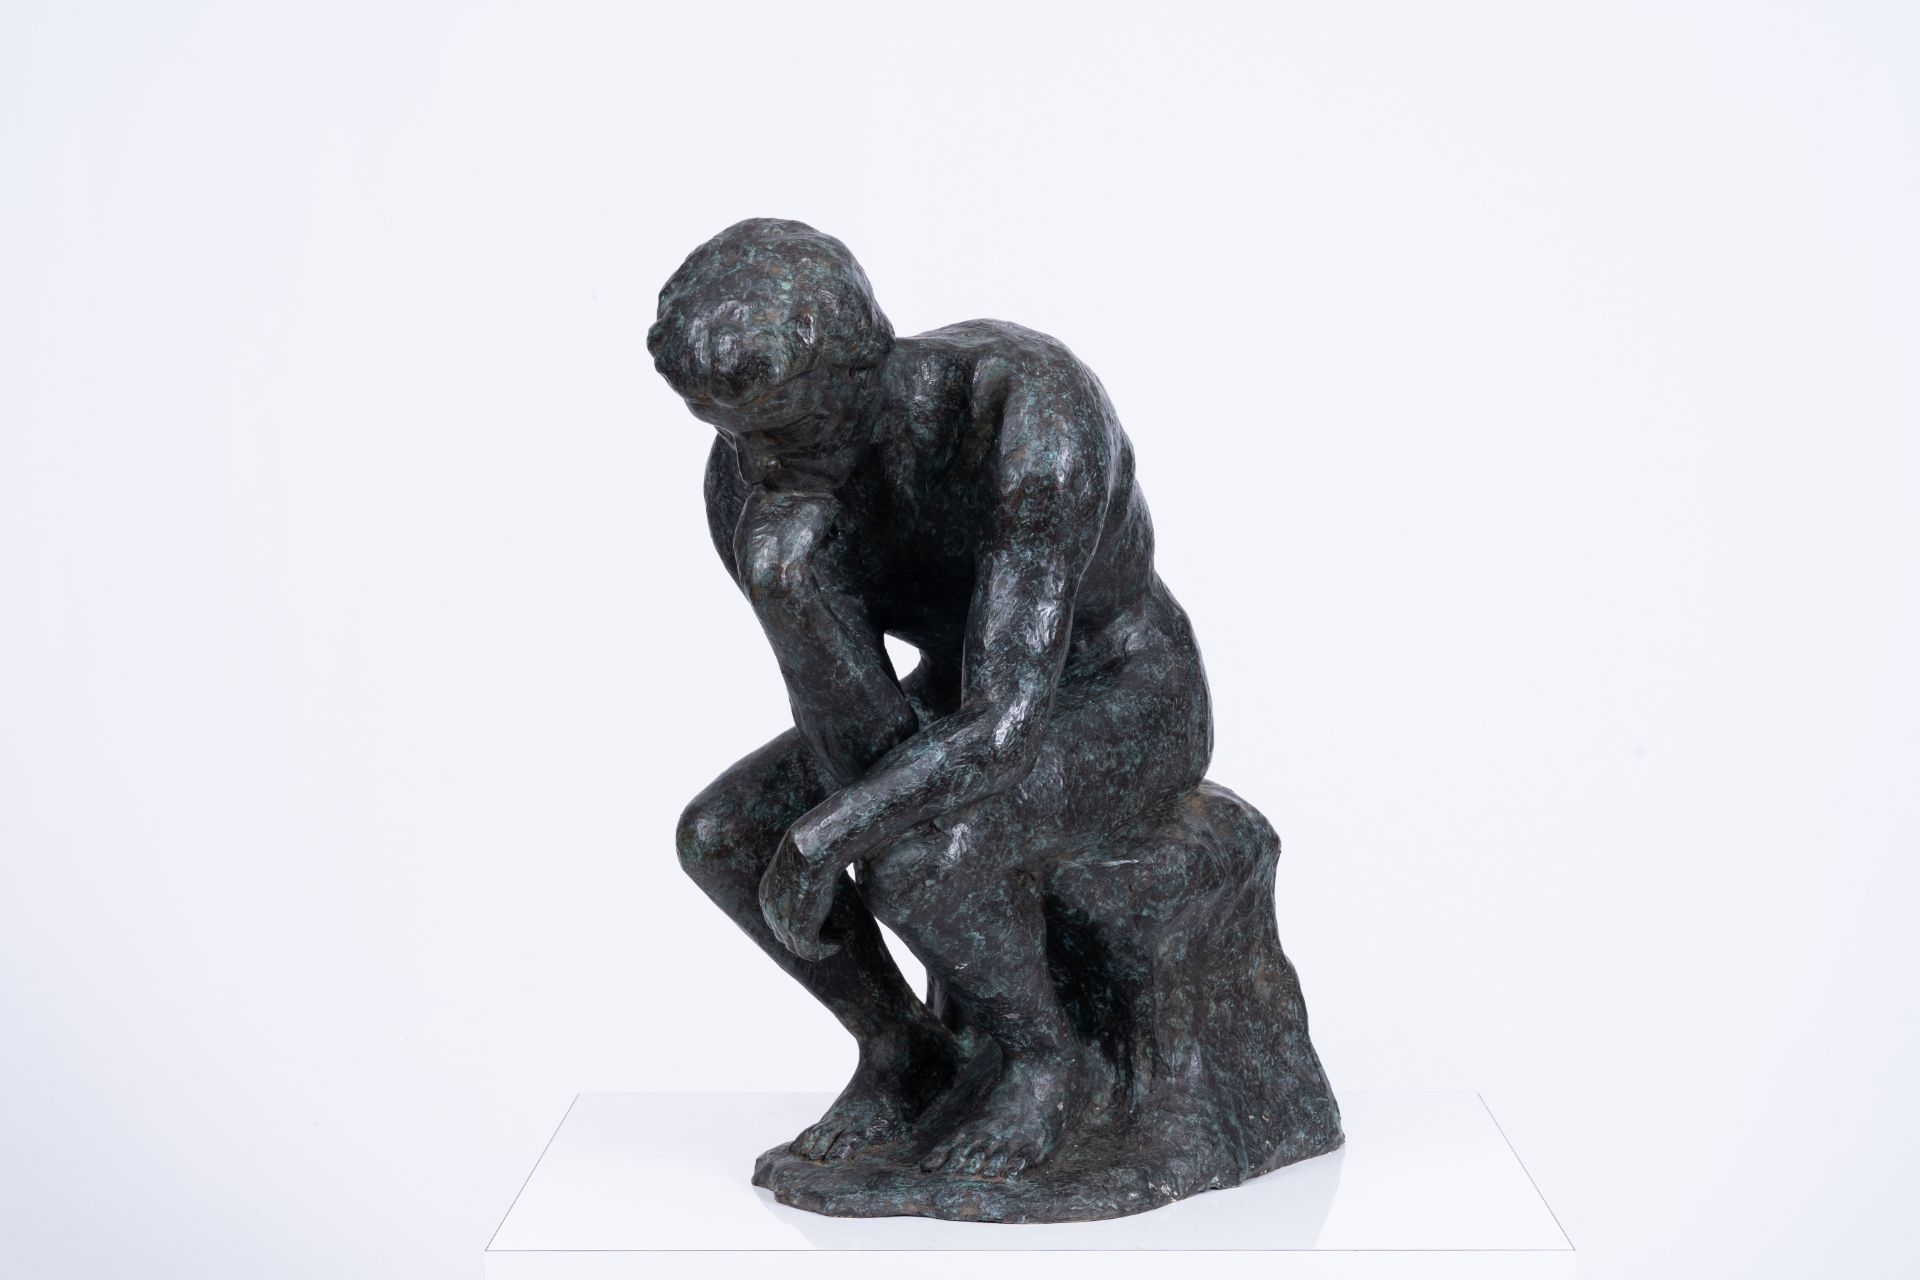 Auguste Rodin (1840-1917, after): The thinker, bronze with green marbled patina, 20th C.